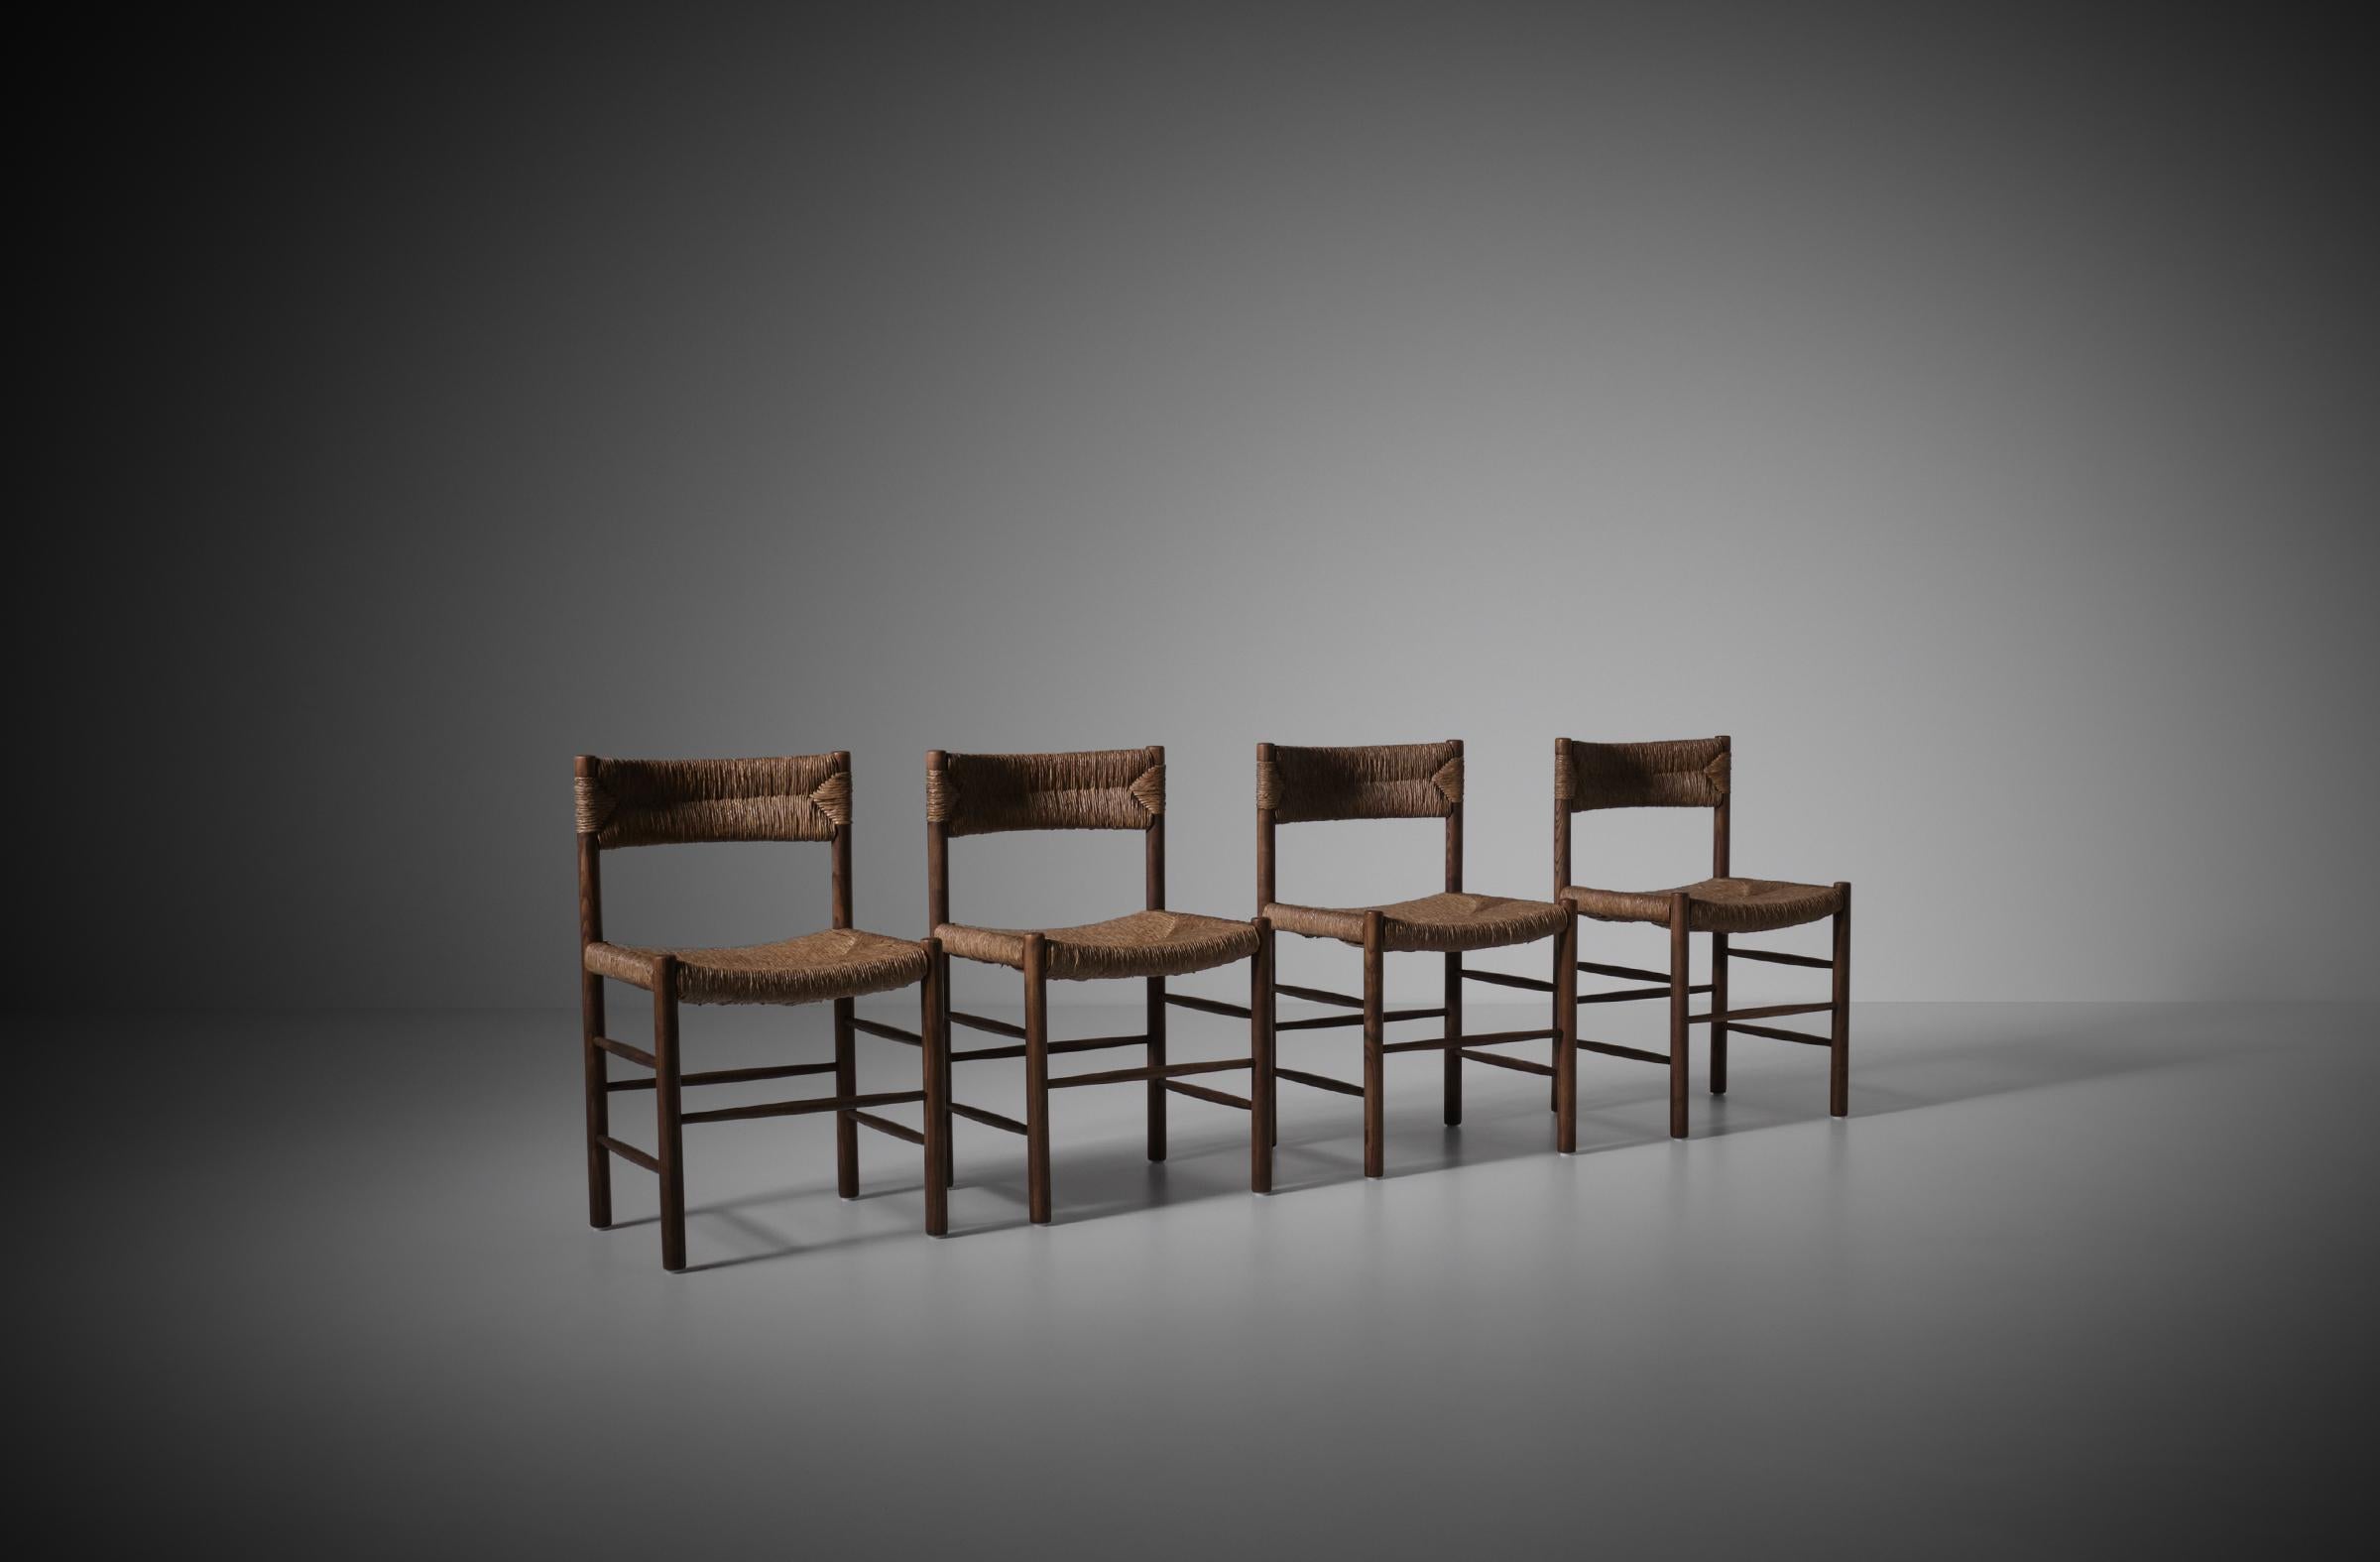 Set of four 'Dordogne' dining chairs by Robert Sentou, France 1950s. The chairs are made of solid dark stained Ash and have a rush seat and backrest in a beautiful woven pattern. The chairs provide a good comfort due to the wider seating part and